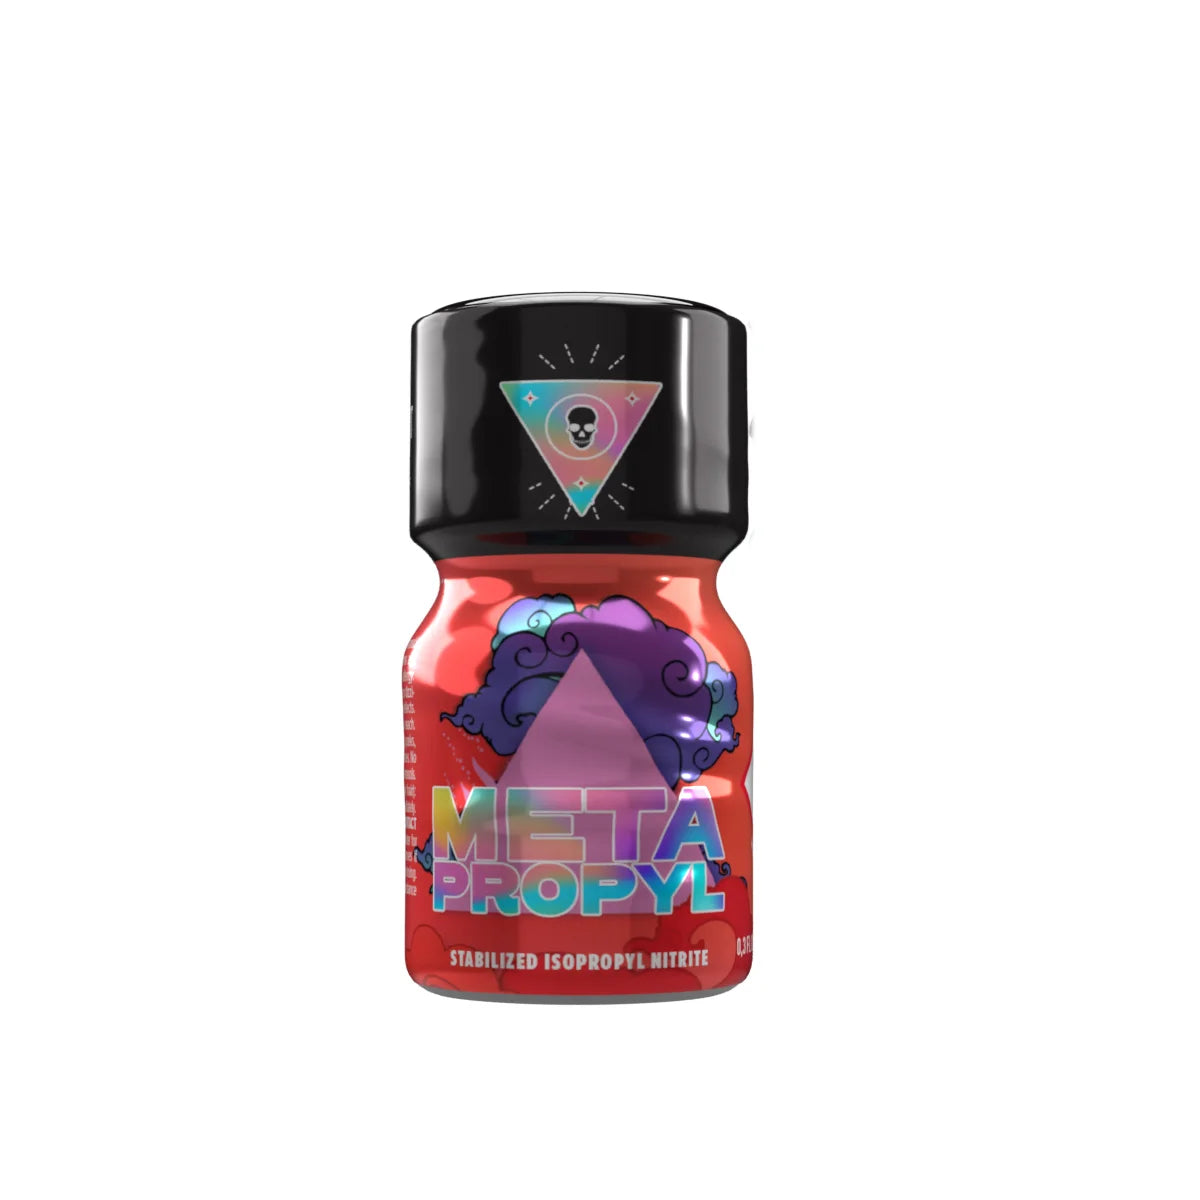 A product photo of a 10ml bottle of Meta Propyl Poppers.